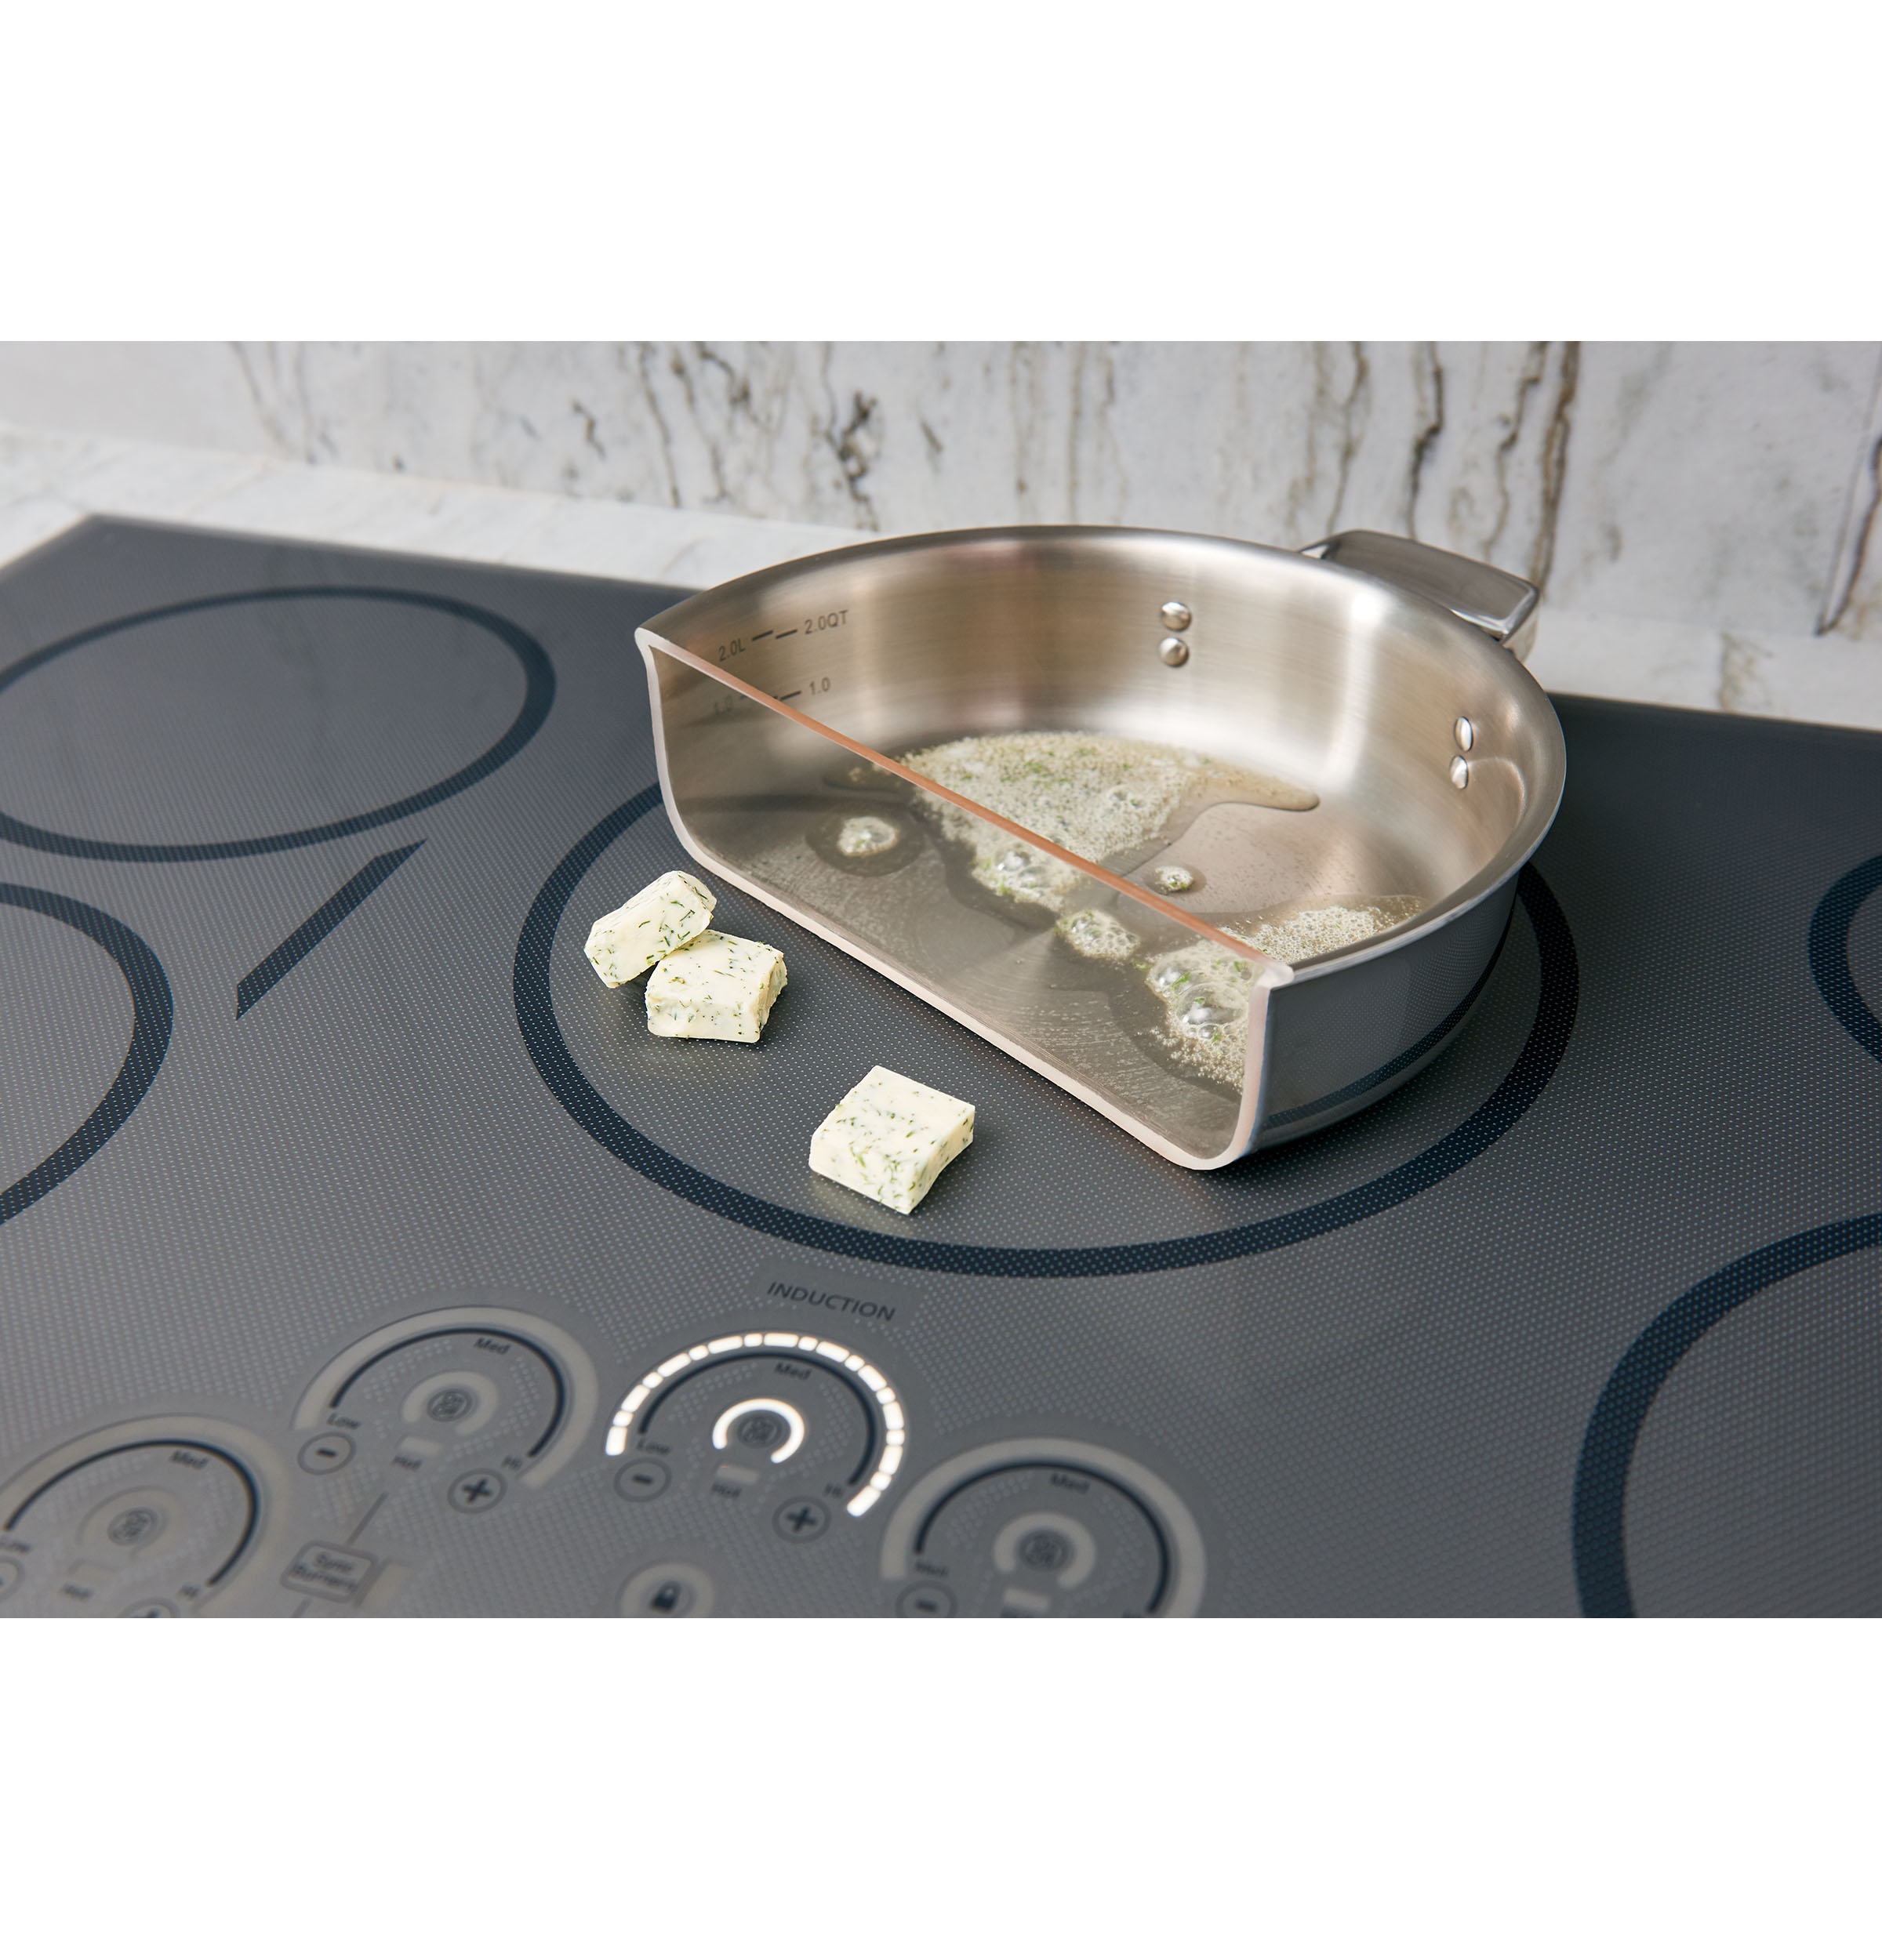 GE Café™ Series 36 Built-In Touch Control Induction Cooktop